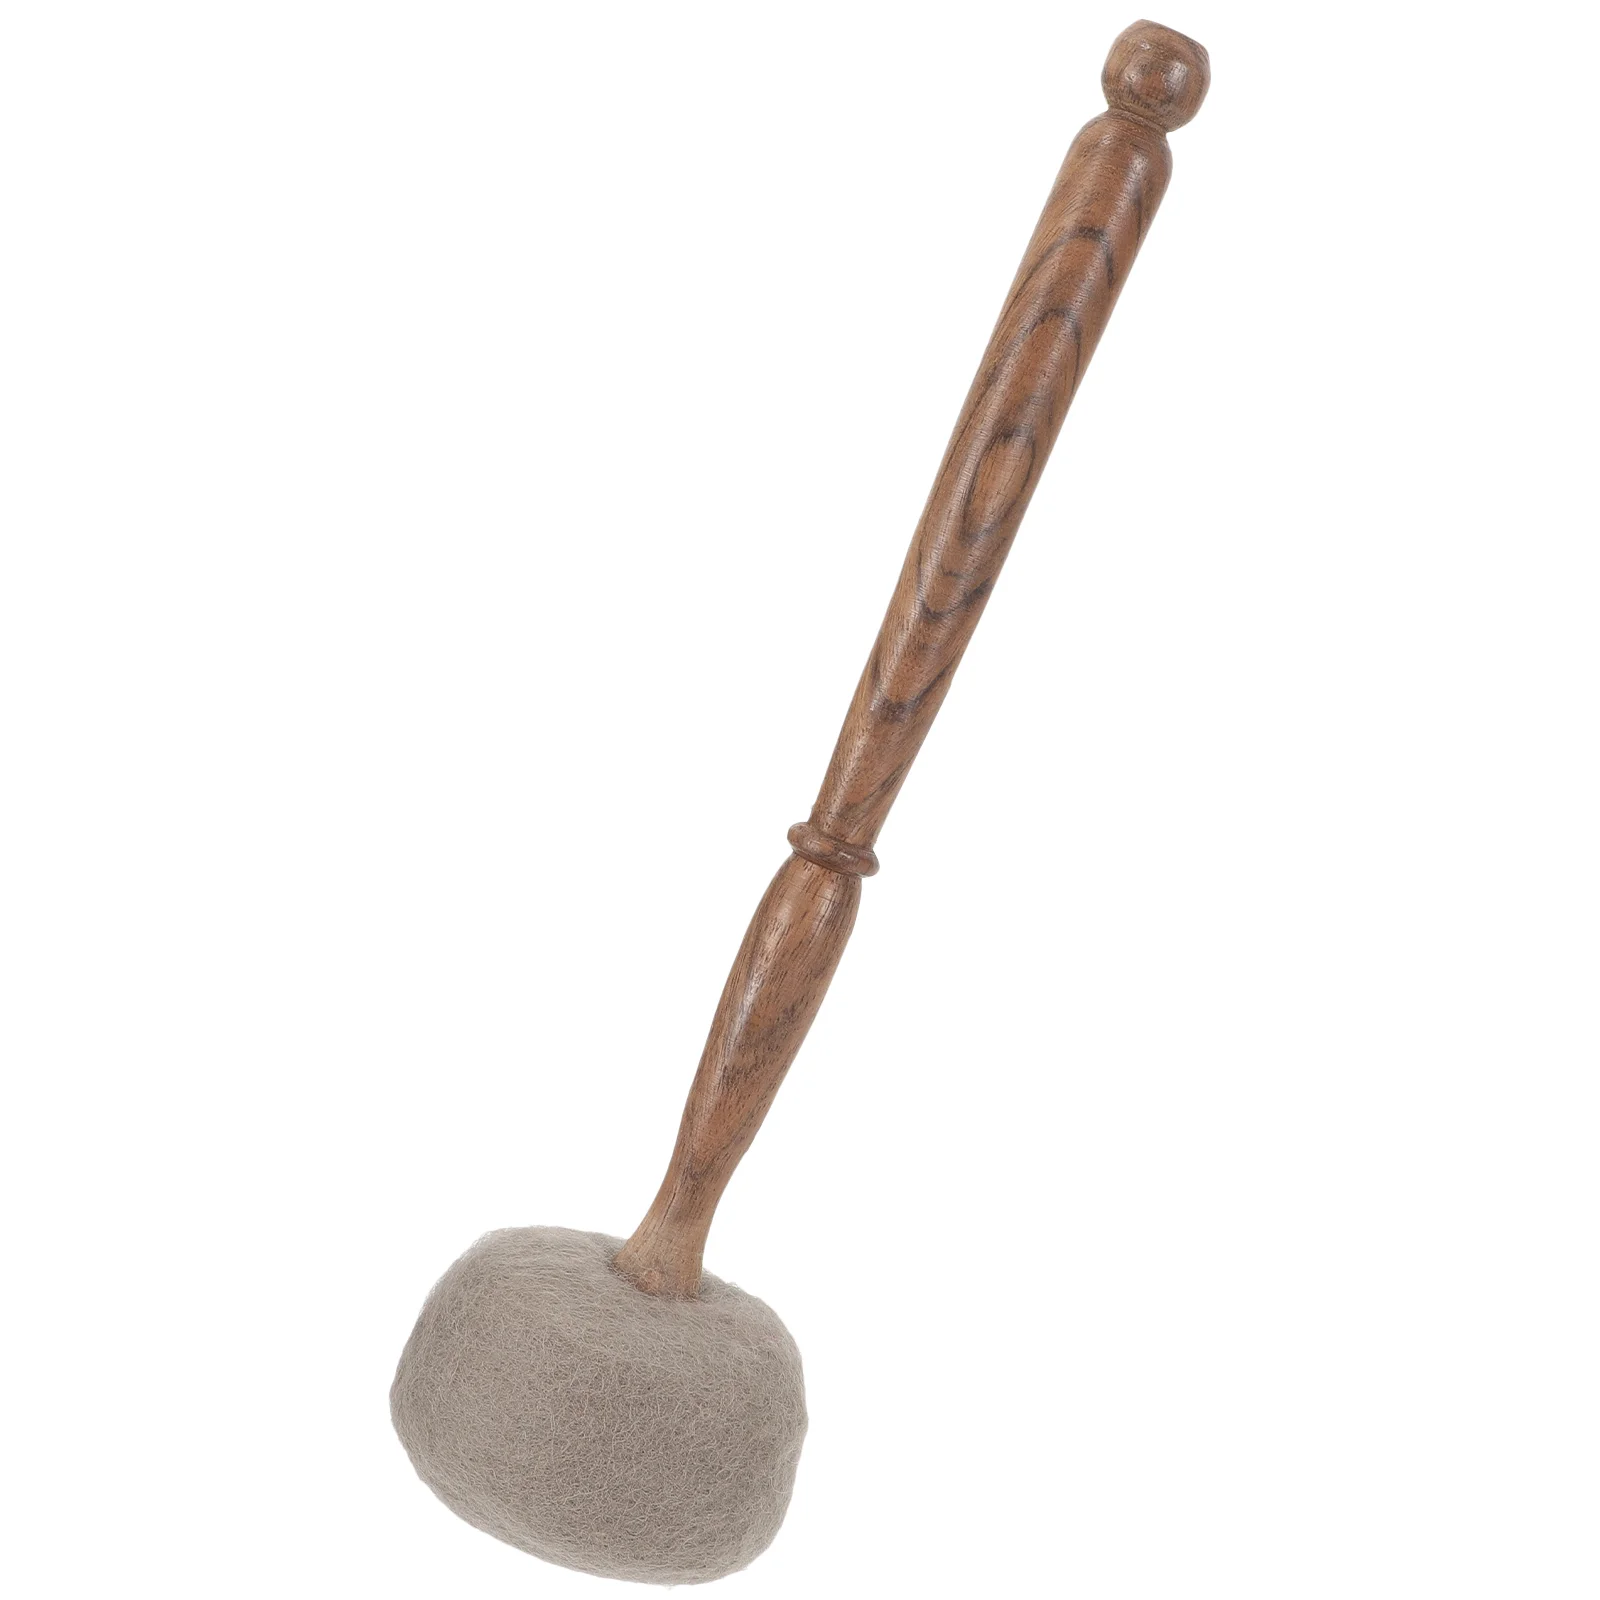 

Sound Bowl Hammer Singing Parts Wooden Stick Accessory Yoga Accessories Meditation Manual Mallet